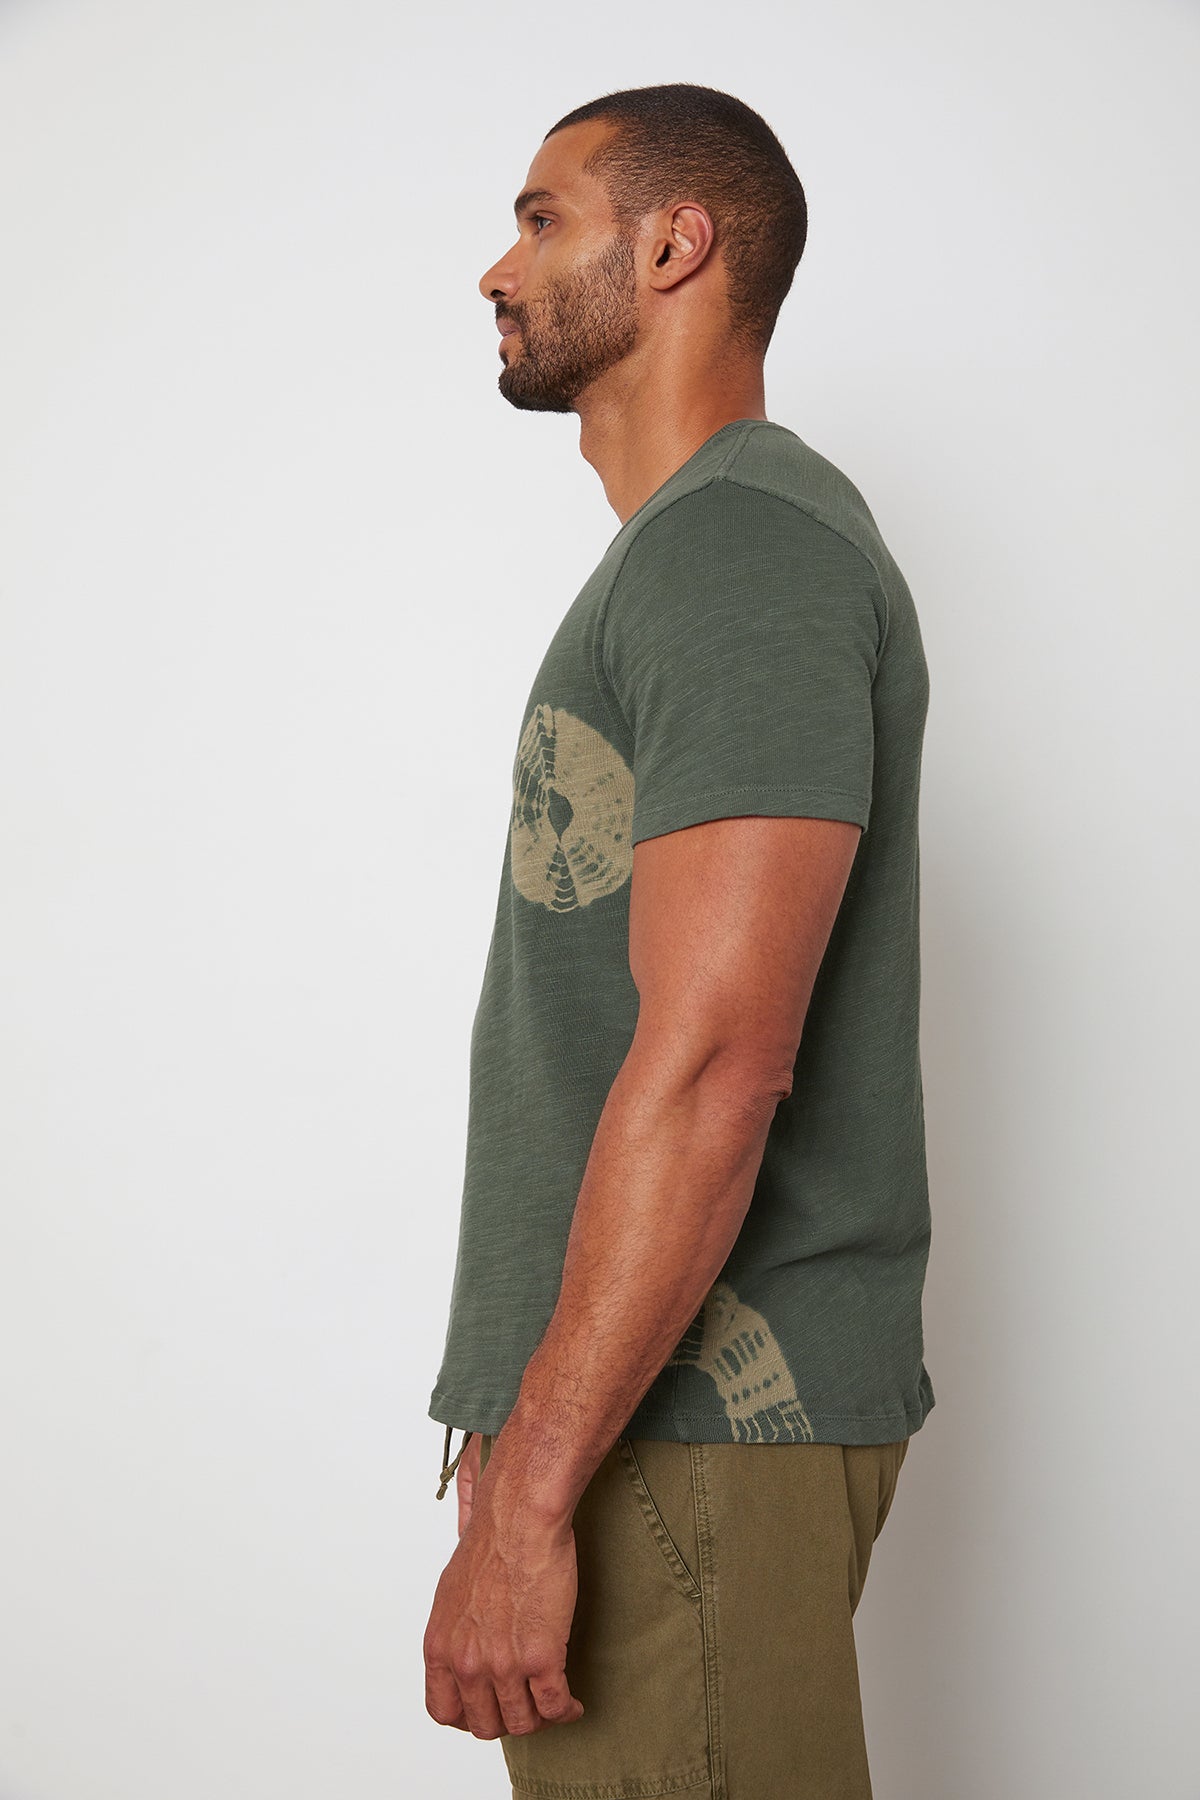   Asher tee olive side 